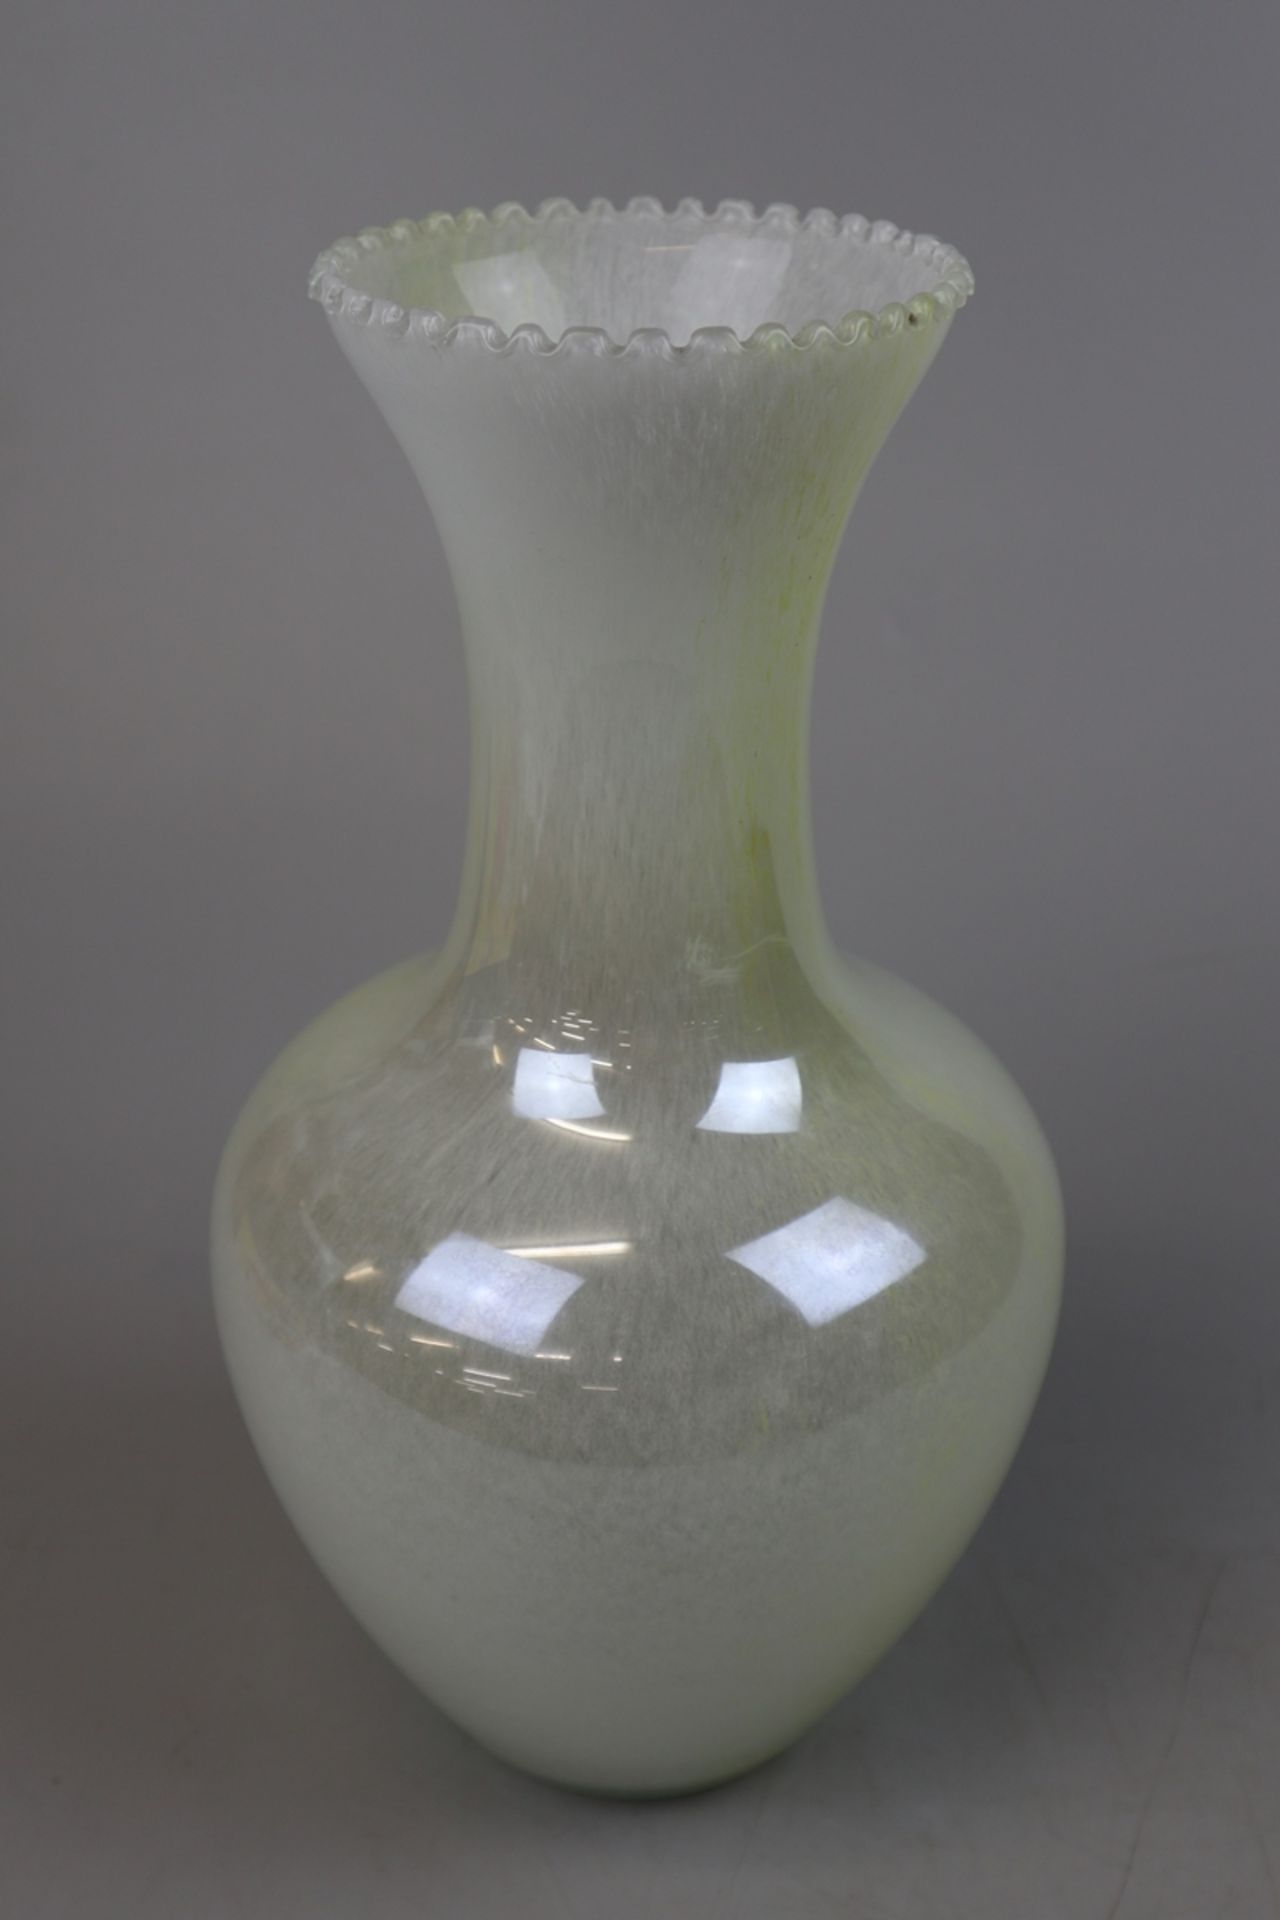 Murano glass vase - Approx height 31cm